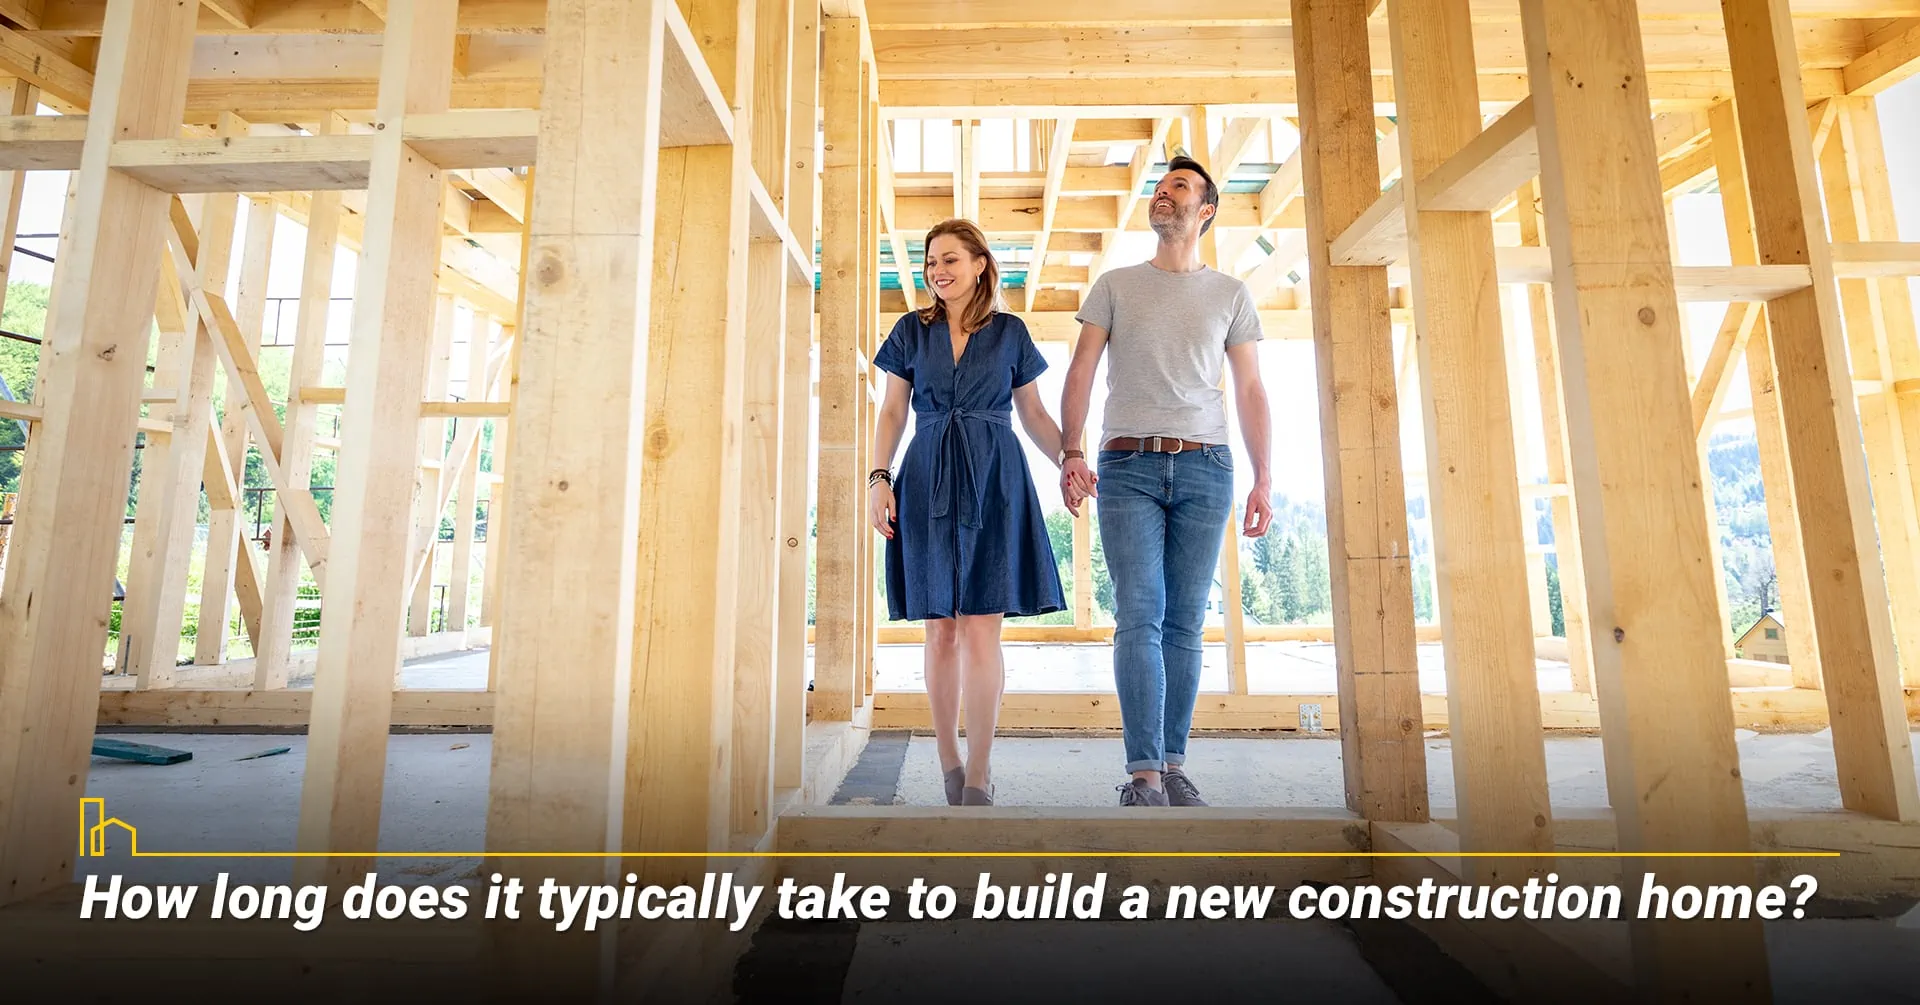 How long does it typically take to build a new construction home?